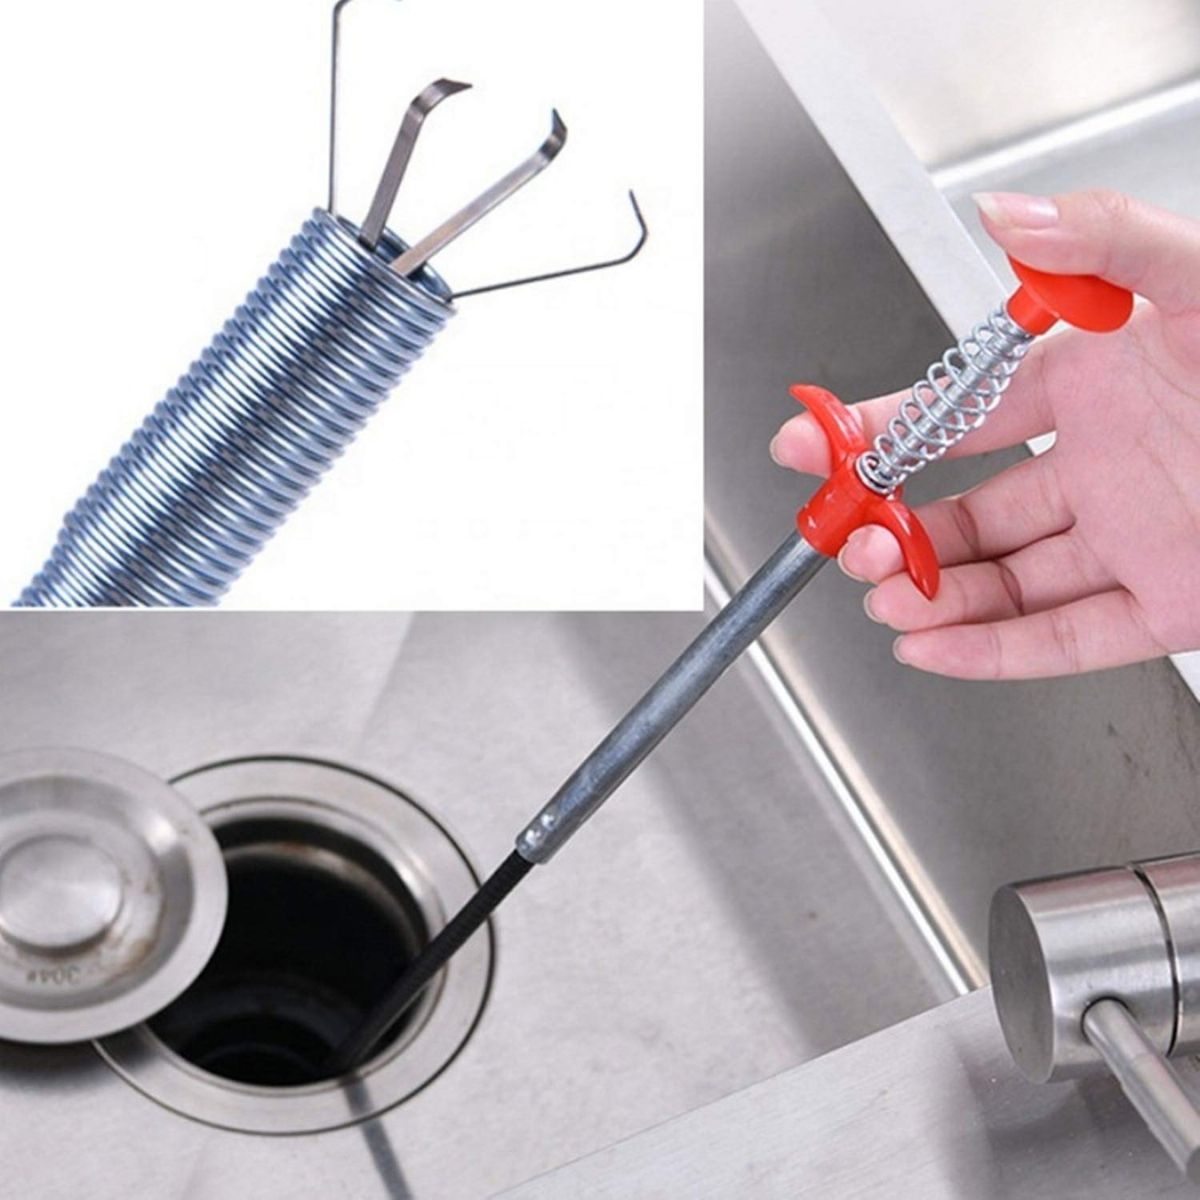 Drain Clog Remover Tool - Flexible Household Sink Grabber With 4 Claws  Flexible Hose Picking Aid Tool - 1.6m - Sewer Cleaning Hook Snake Drain  Grabber Tool Toilet Clog Remover, Retail Babu